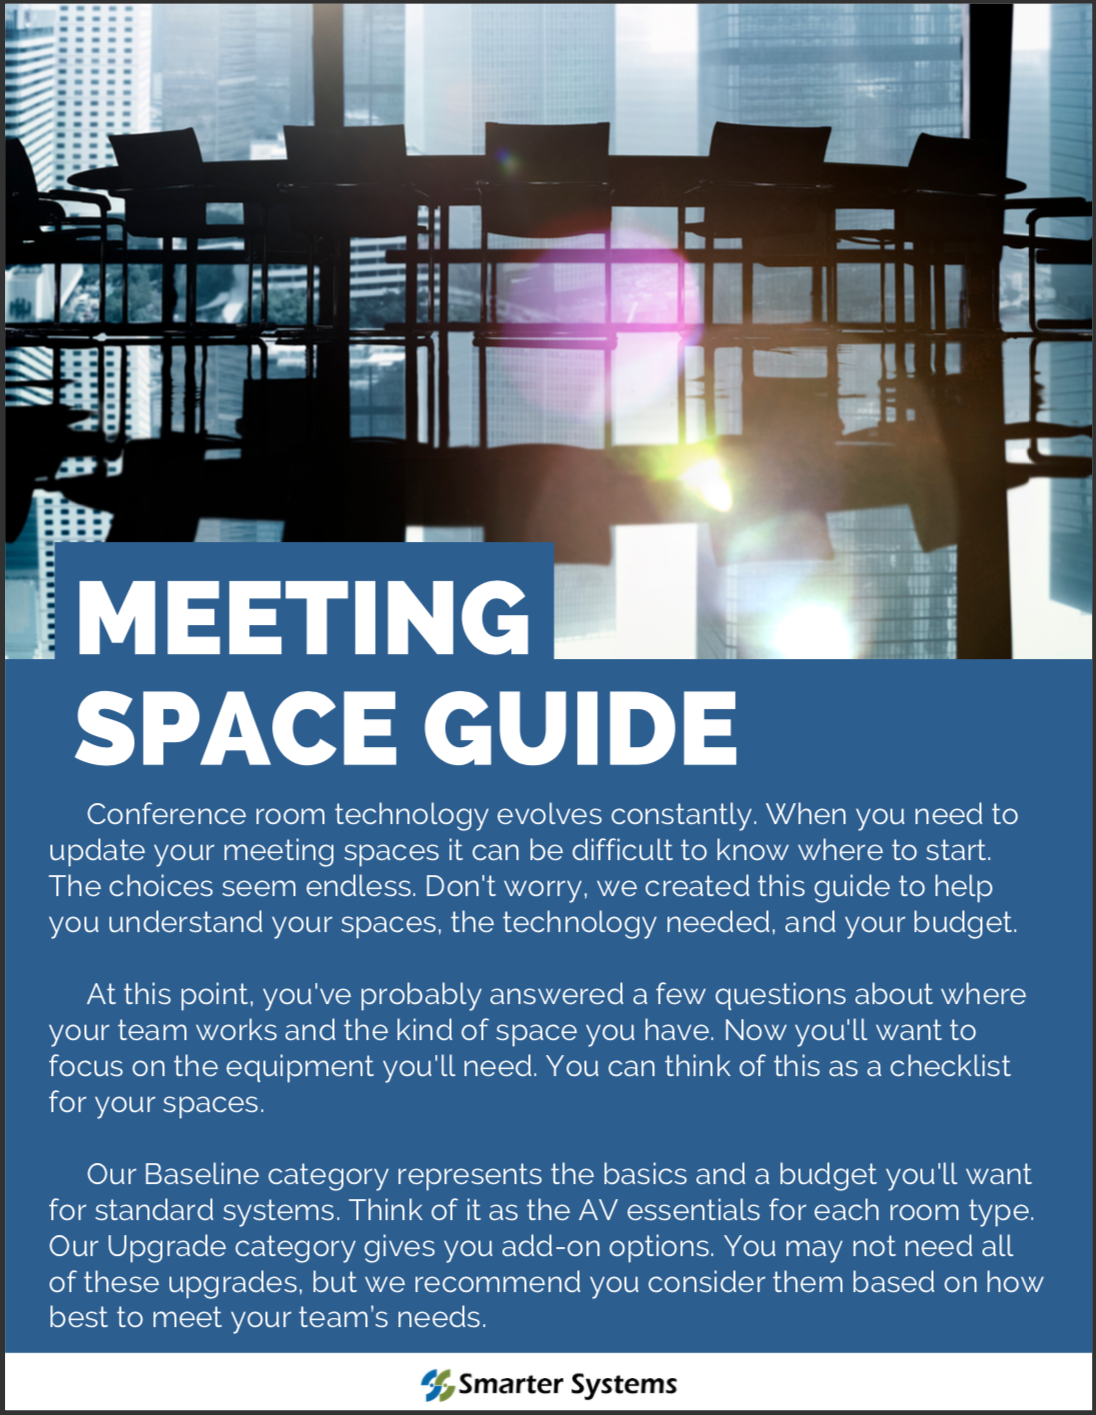 Smarter Systems Meeting Space Guide